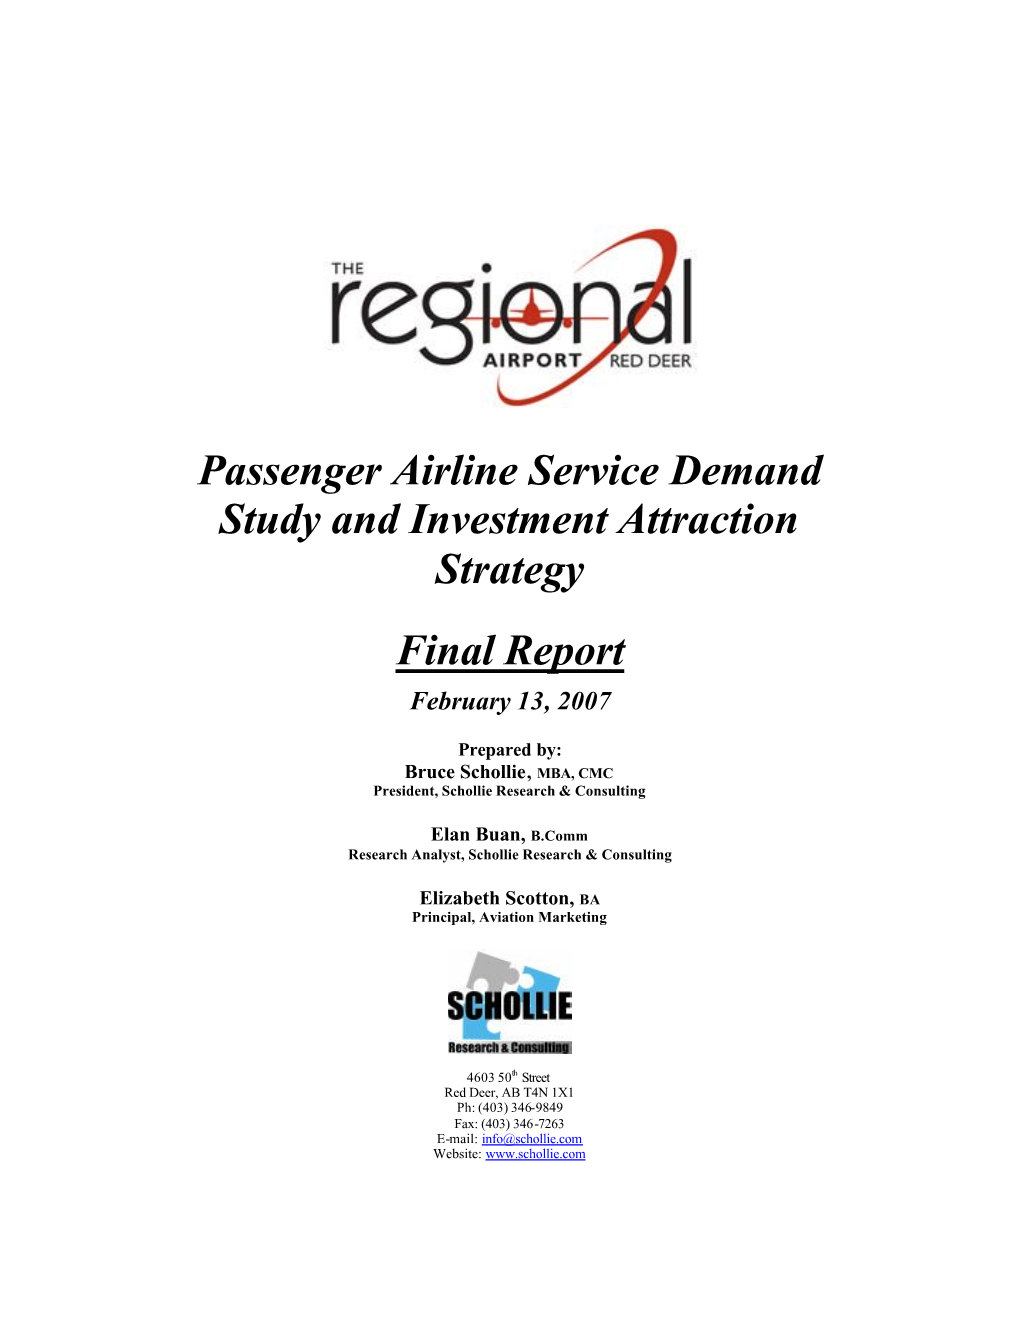 Passenger Airline Service Demand Study and Investment Attraction Strategy